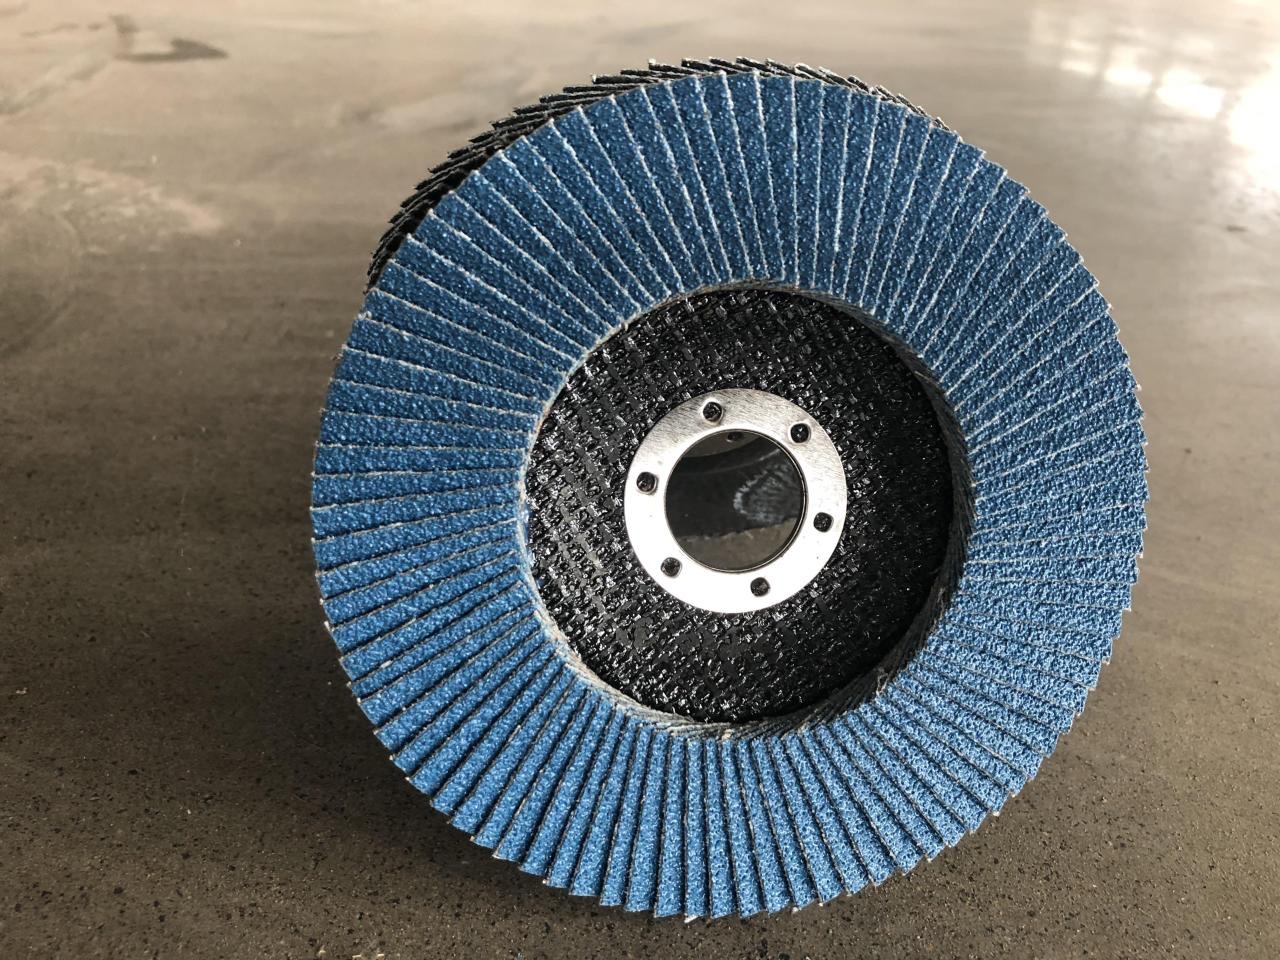 Features and application of flap disc_zirconia flap disc_aluminium oxide grinding disc_flap disk manufacturer